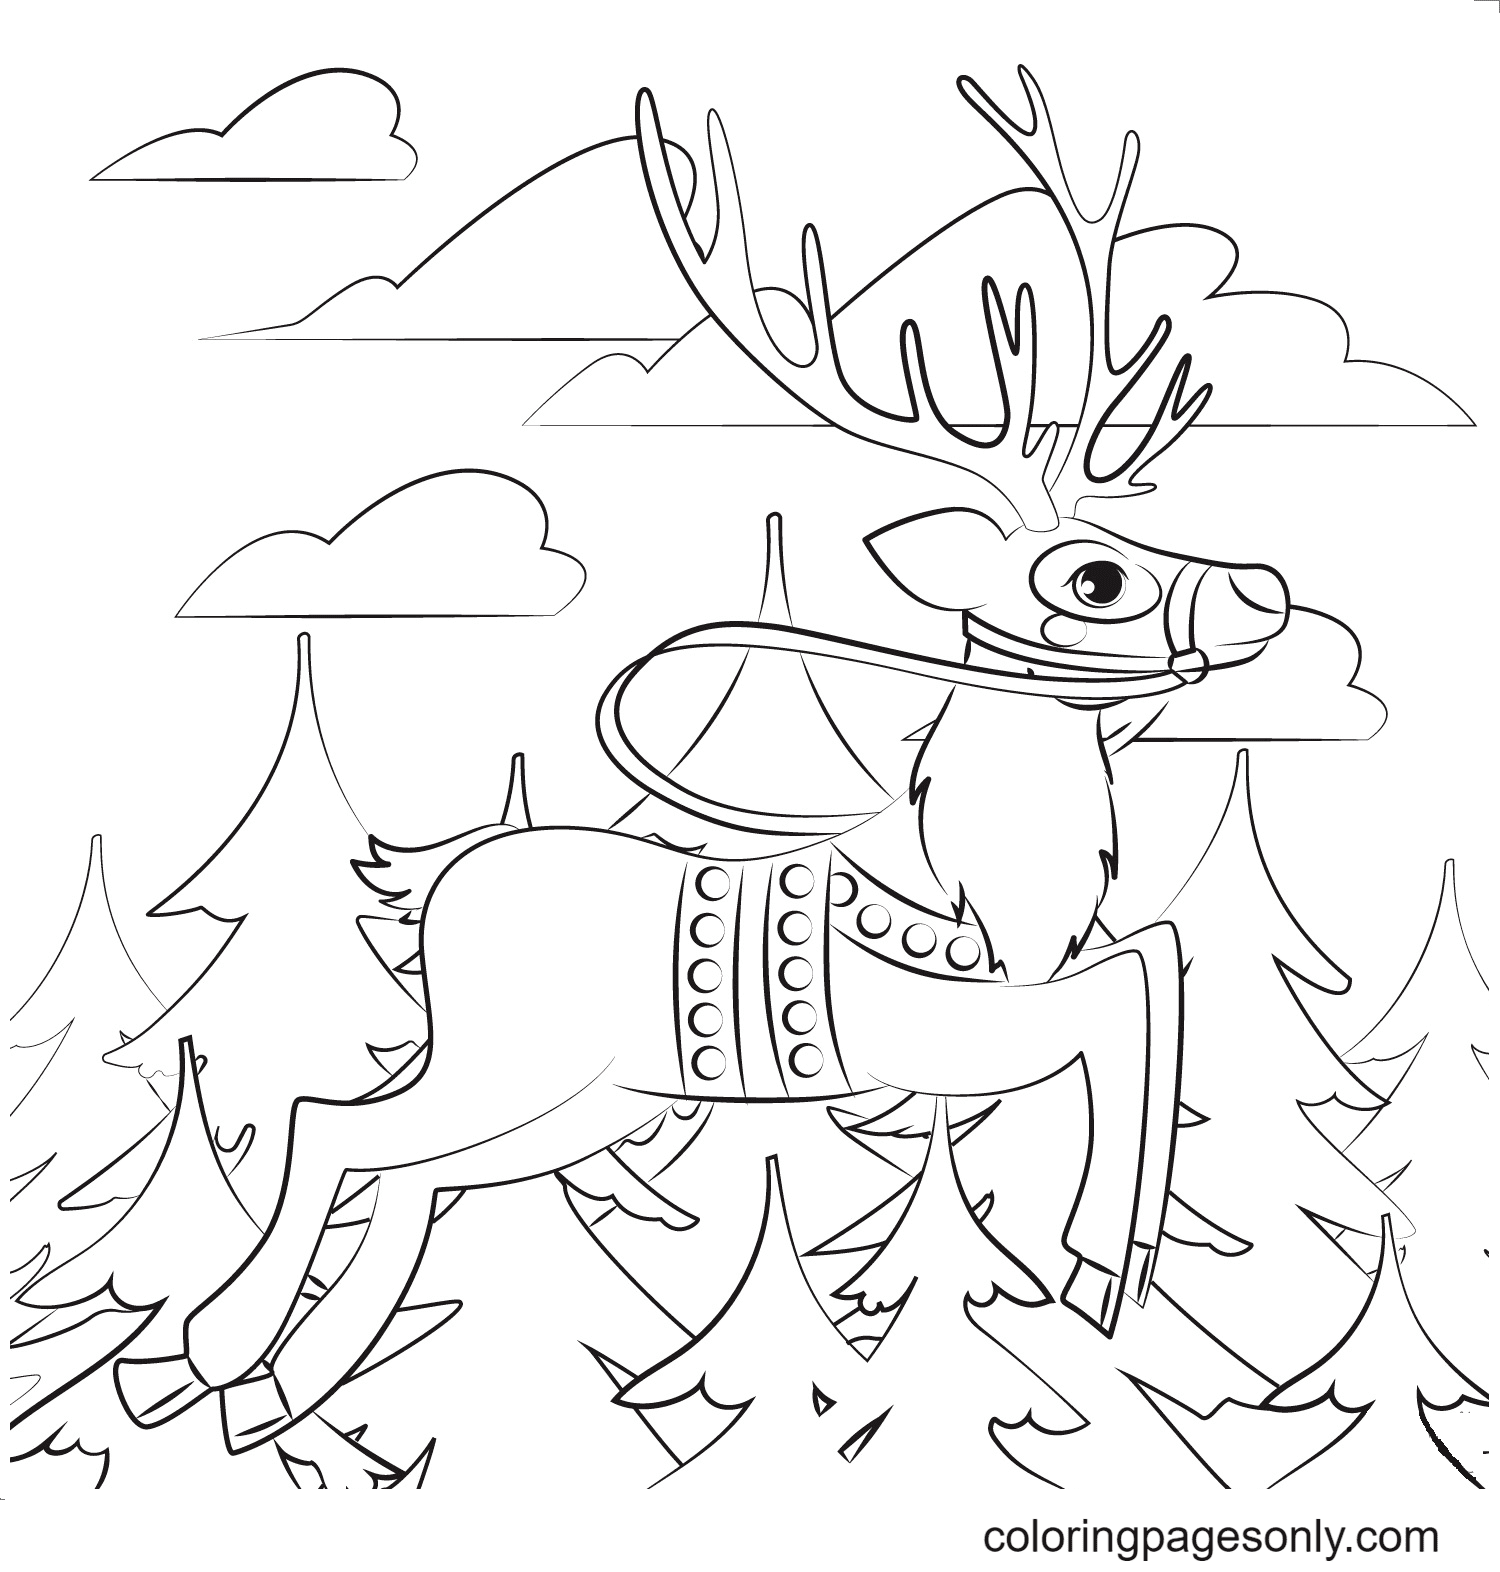 Reindeer Walking Through The Pine Forest Coloring Page